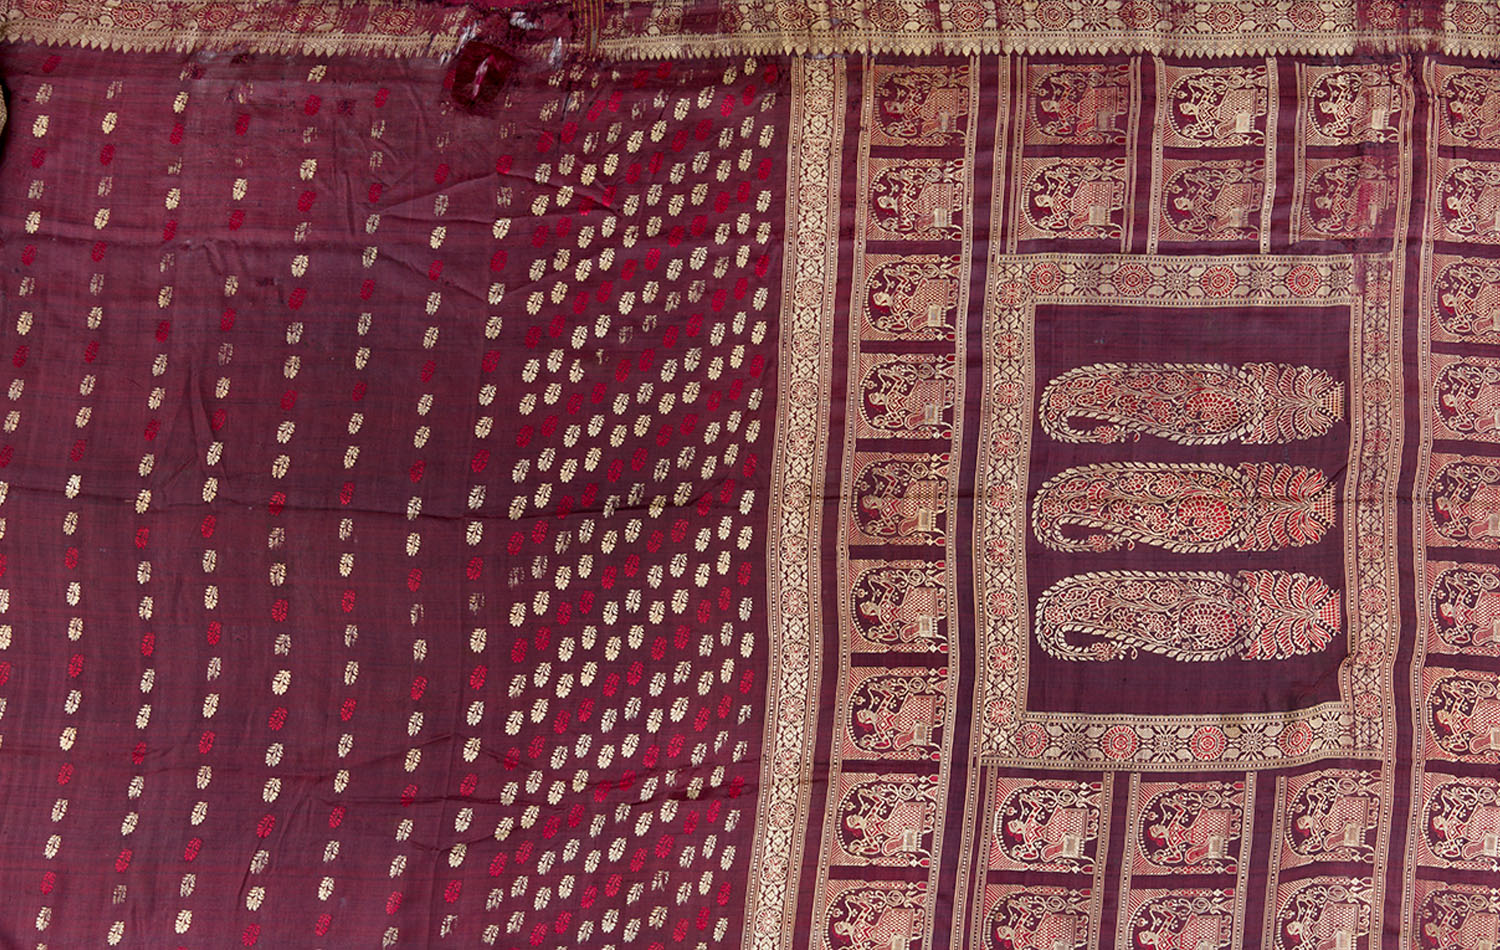 A Baluchari saree with the pallu bearing paisley motifs within a rectangular border composed of a repeating figure of a seated man.